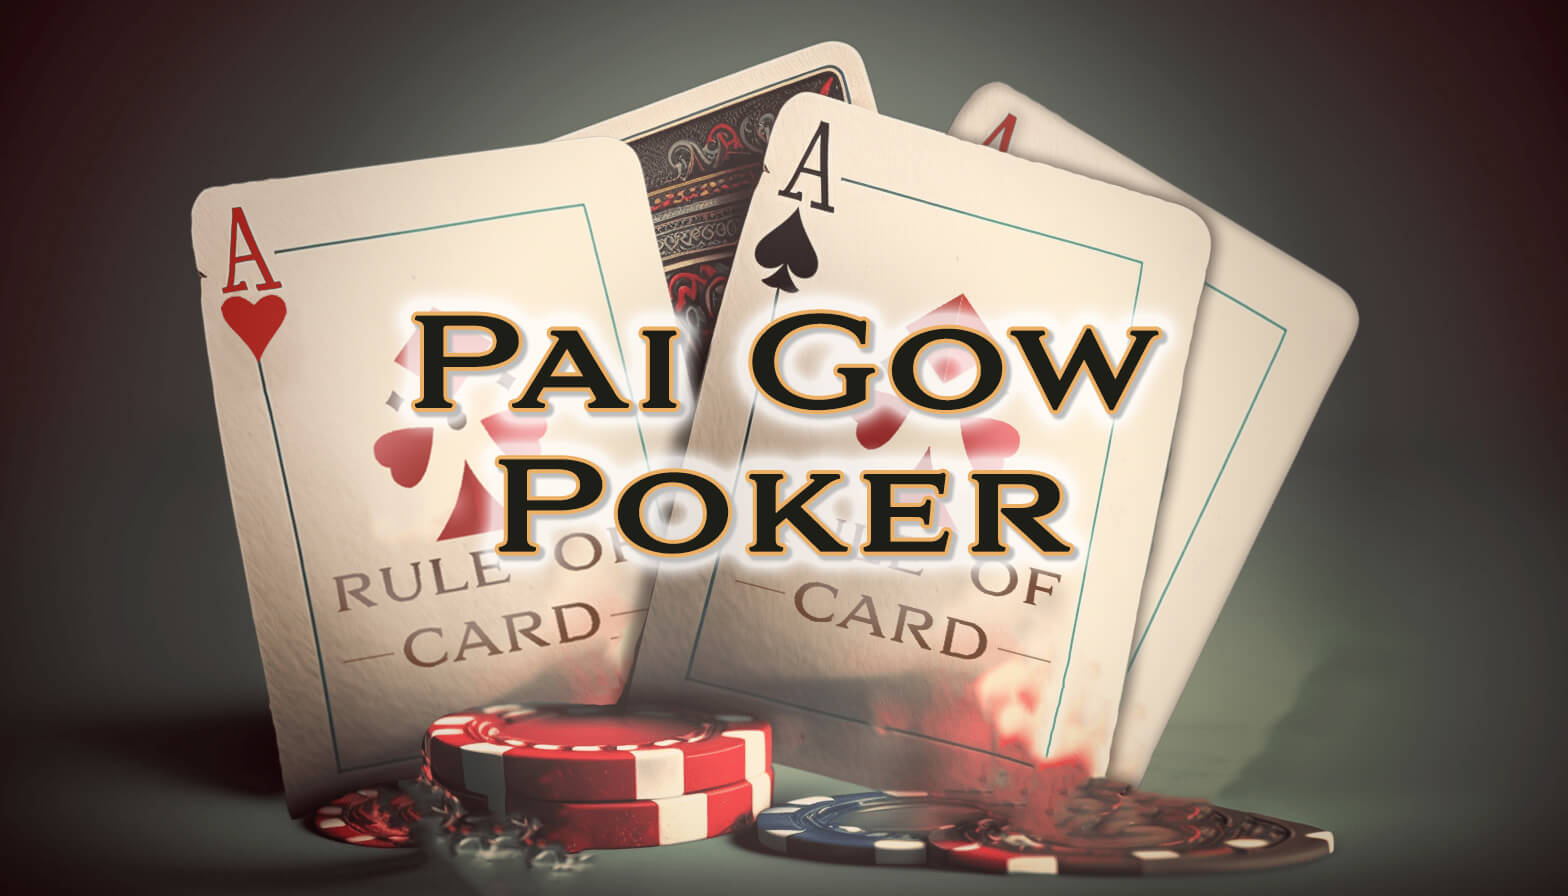 Playing the card game Pai Gow Poker